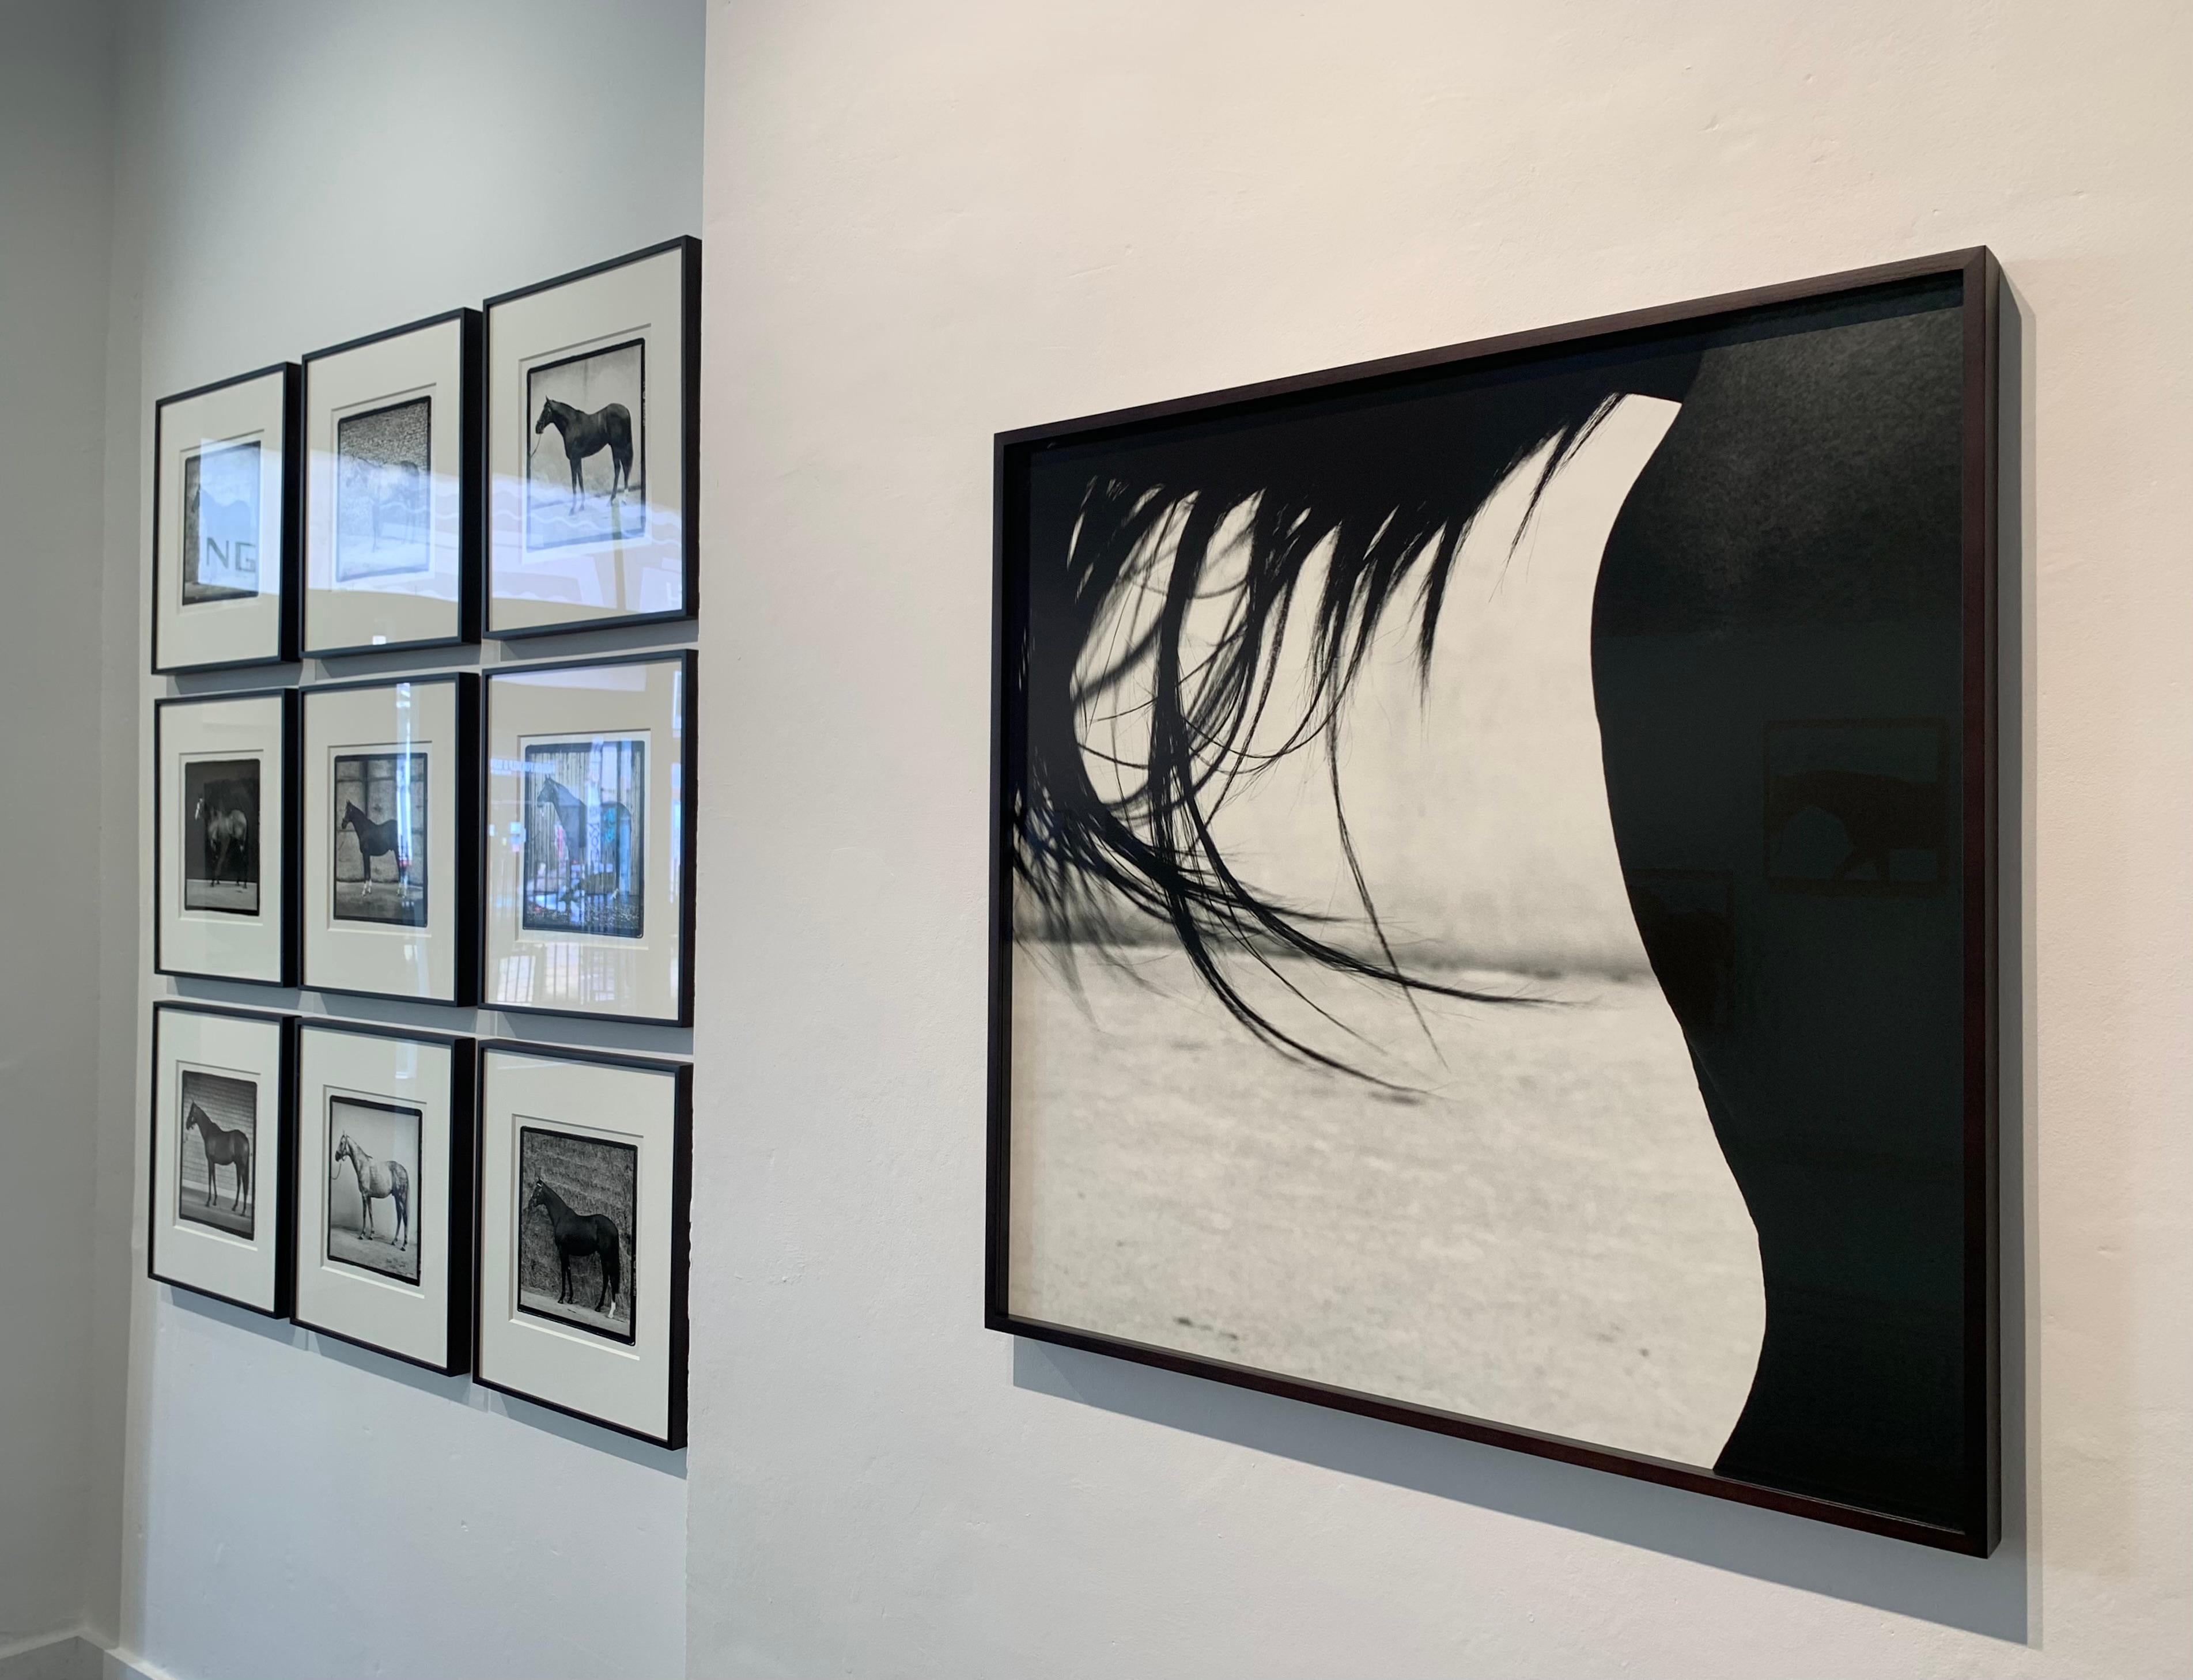 Xaar, ‘Tail', 2001 by John Reardon
Edition of 7 (2/7)
Silver Gelatin Print, Mounted on Aluminium, Custom framed, UV protective Museum AR Glass

This piece was part of (after) Whistlejacket - Contemporary Equine Photographs exhibition at MMX Gallery